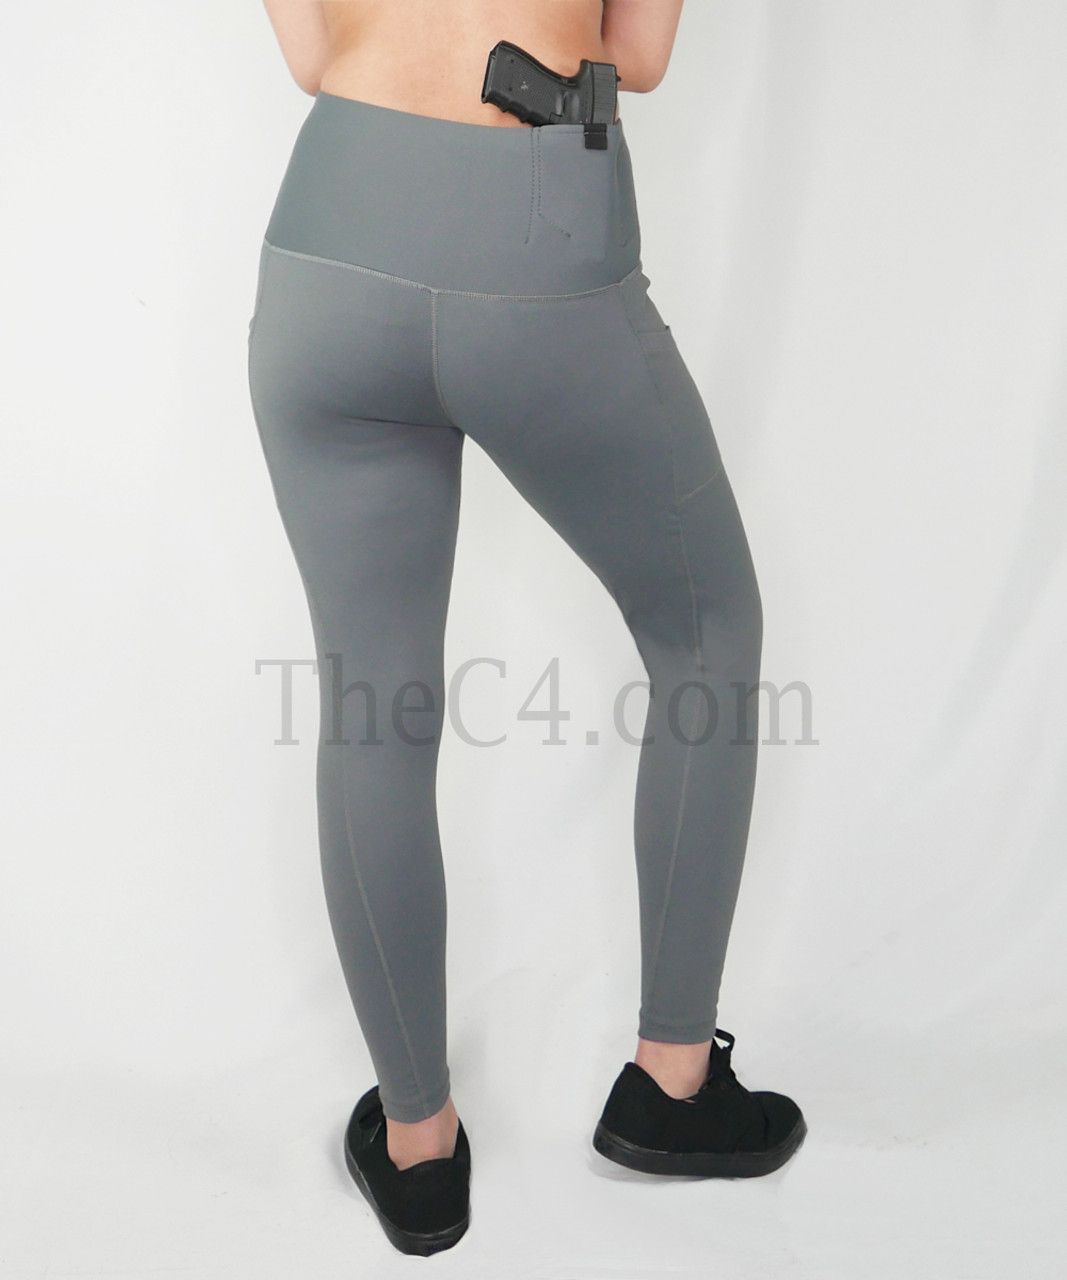 Concealed Carry Yoga Pants Review